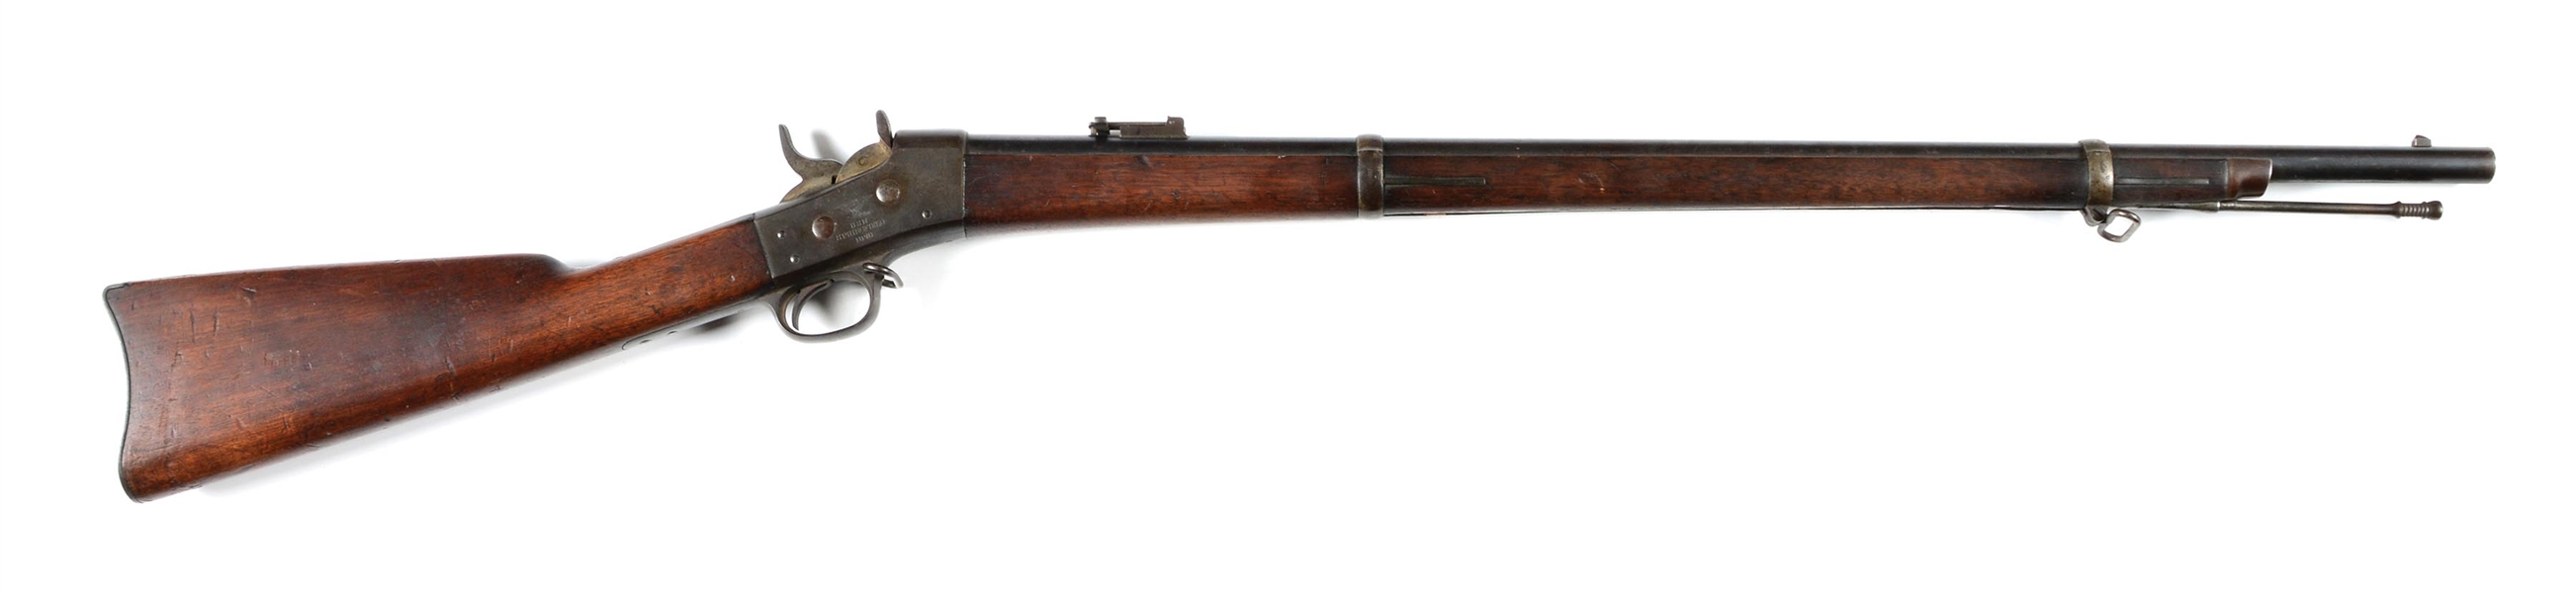 (A) SPRINGFIELD MODEL 1870 NAVY ROLLING BLOCK RIFLE.